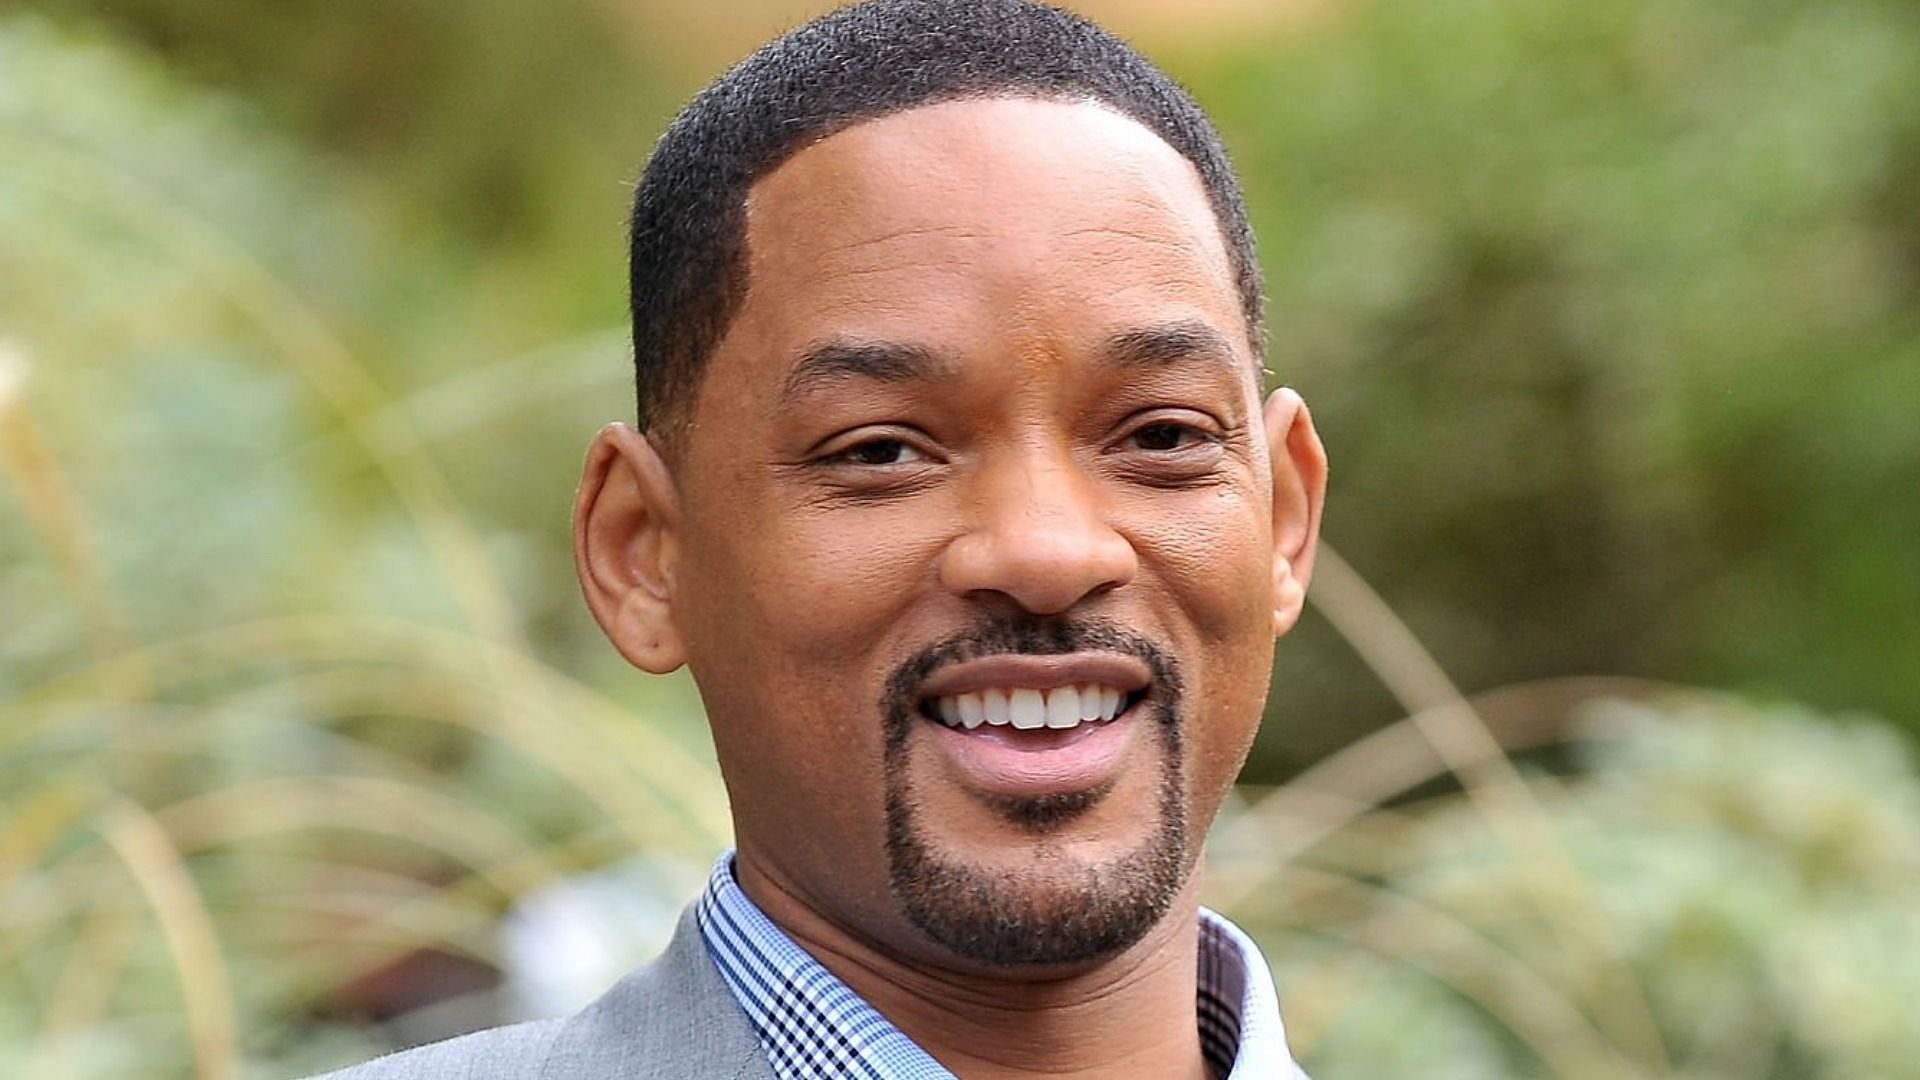 Social media users criticized the Academy for its decade-long ban on Will Smith (Image via Jerrod Harris/Getty Images)